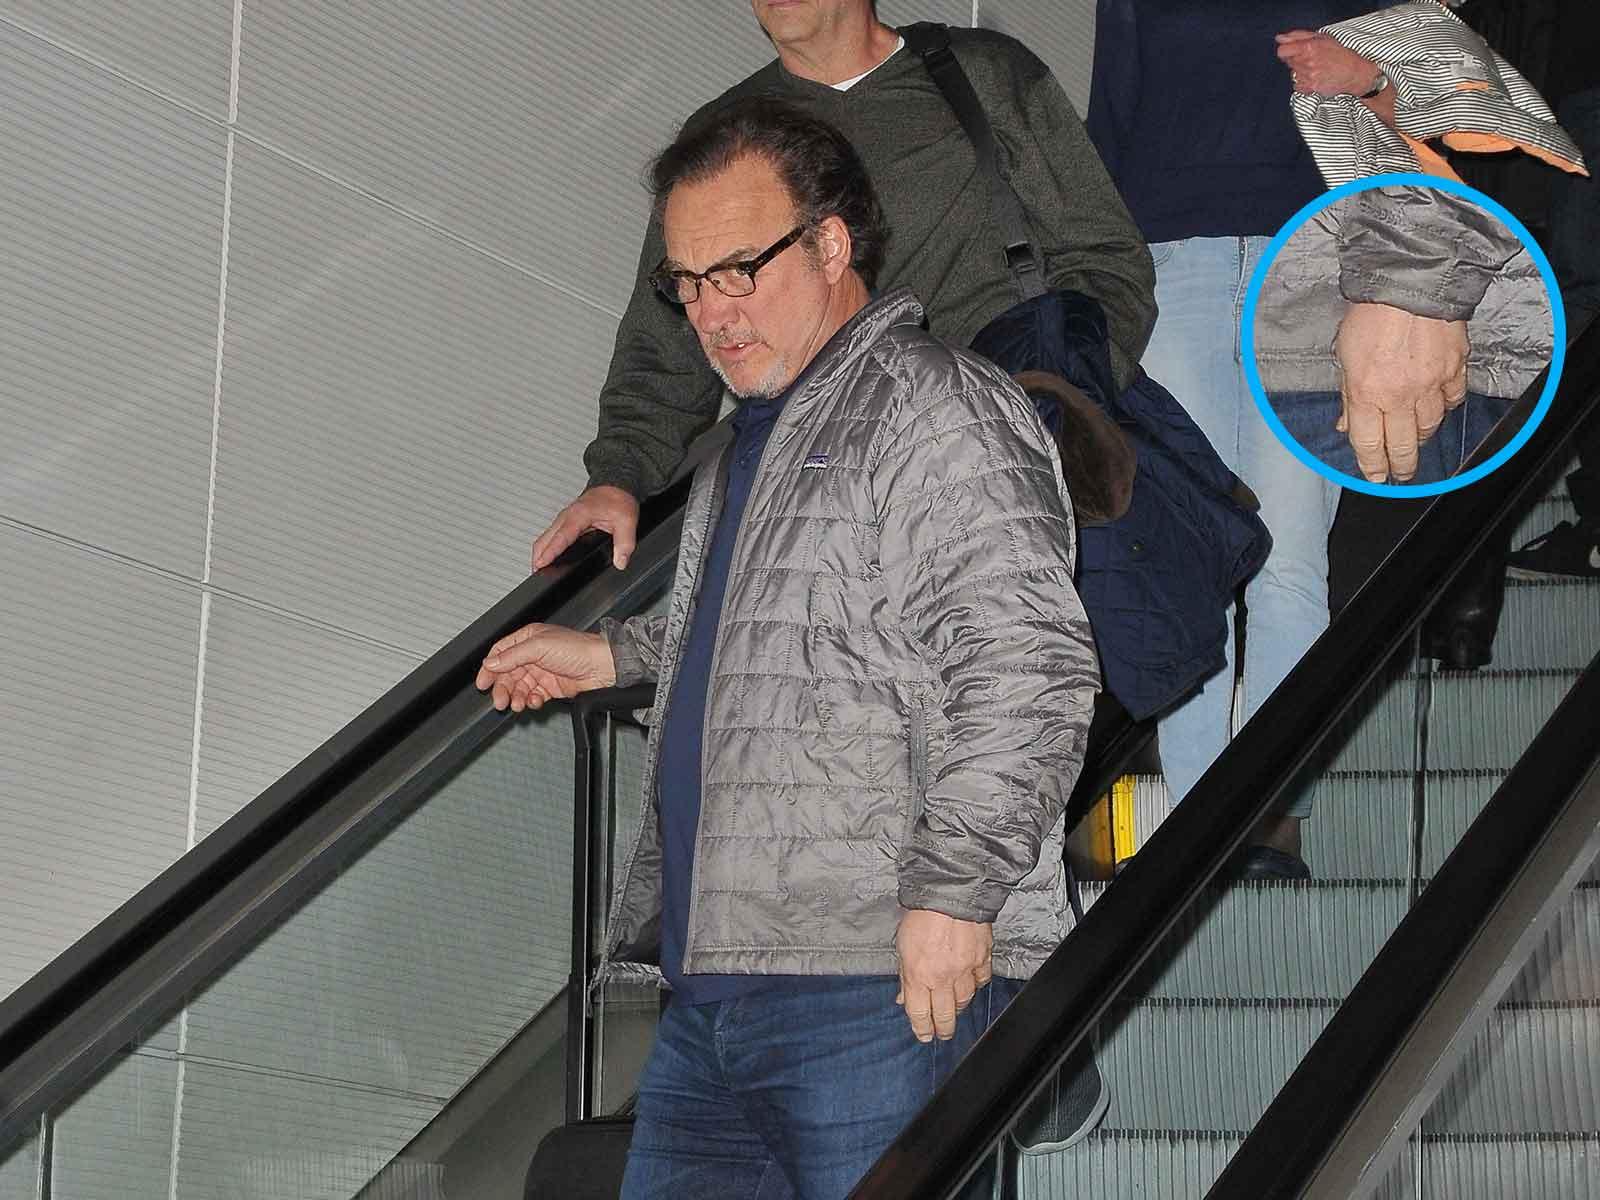 Jim Belushi Ditches the Wedding Ring After Wife Files for Divorce